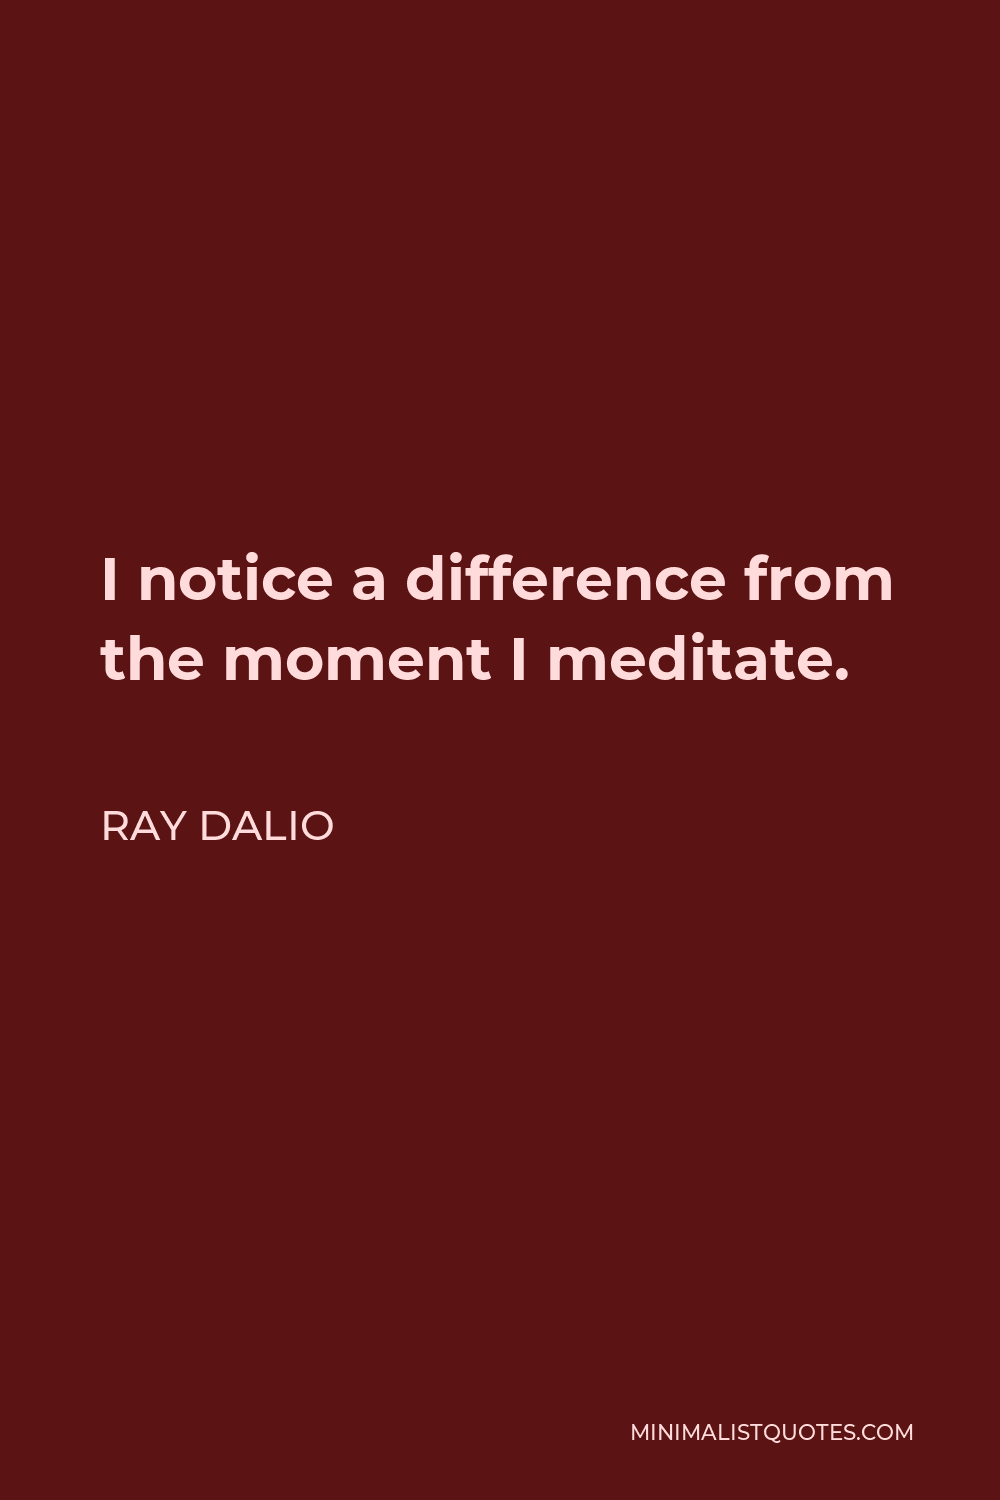 Ray Dalio Quote - I notice a difference from the moment I meditate.